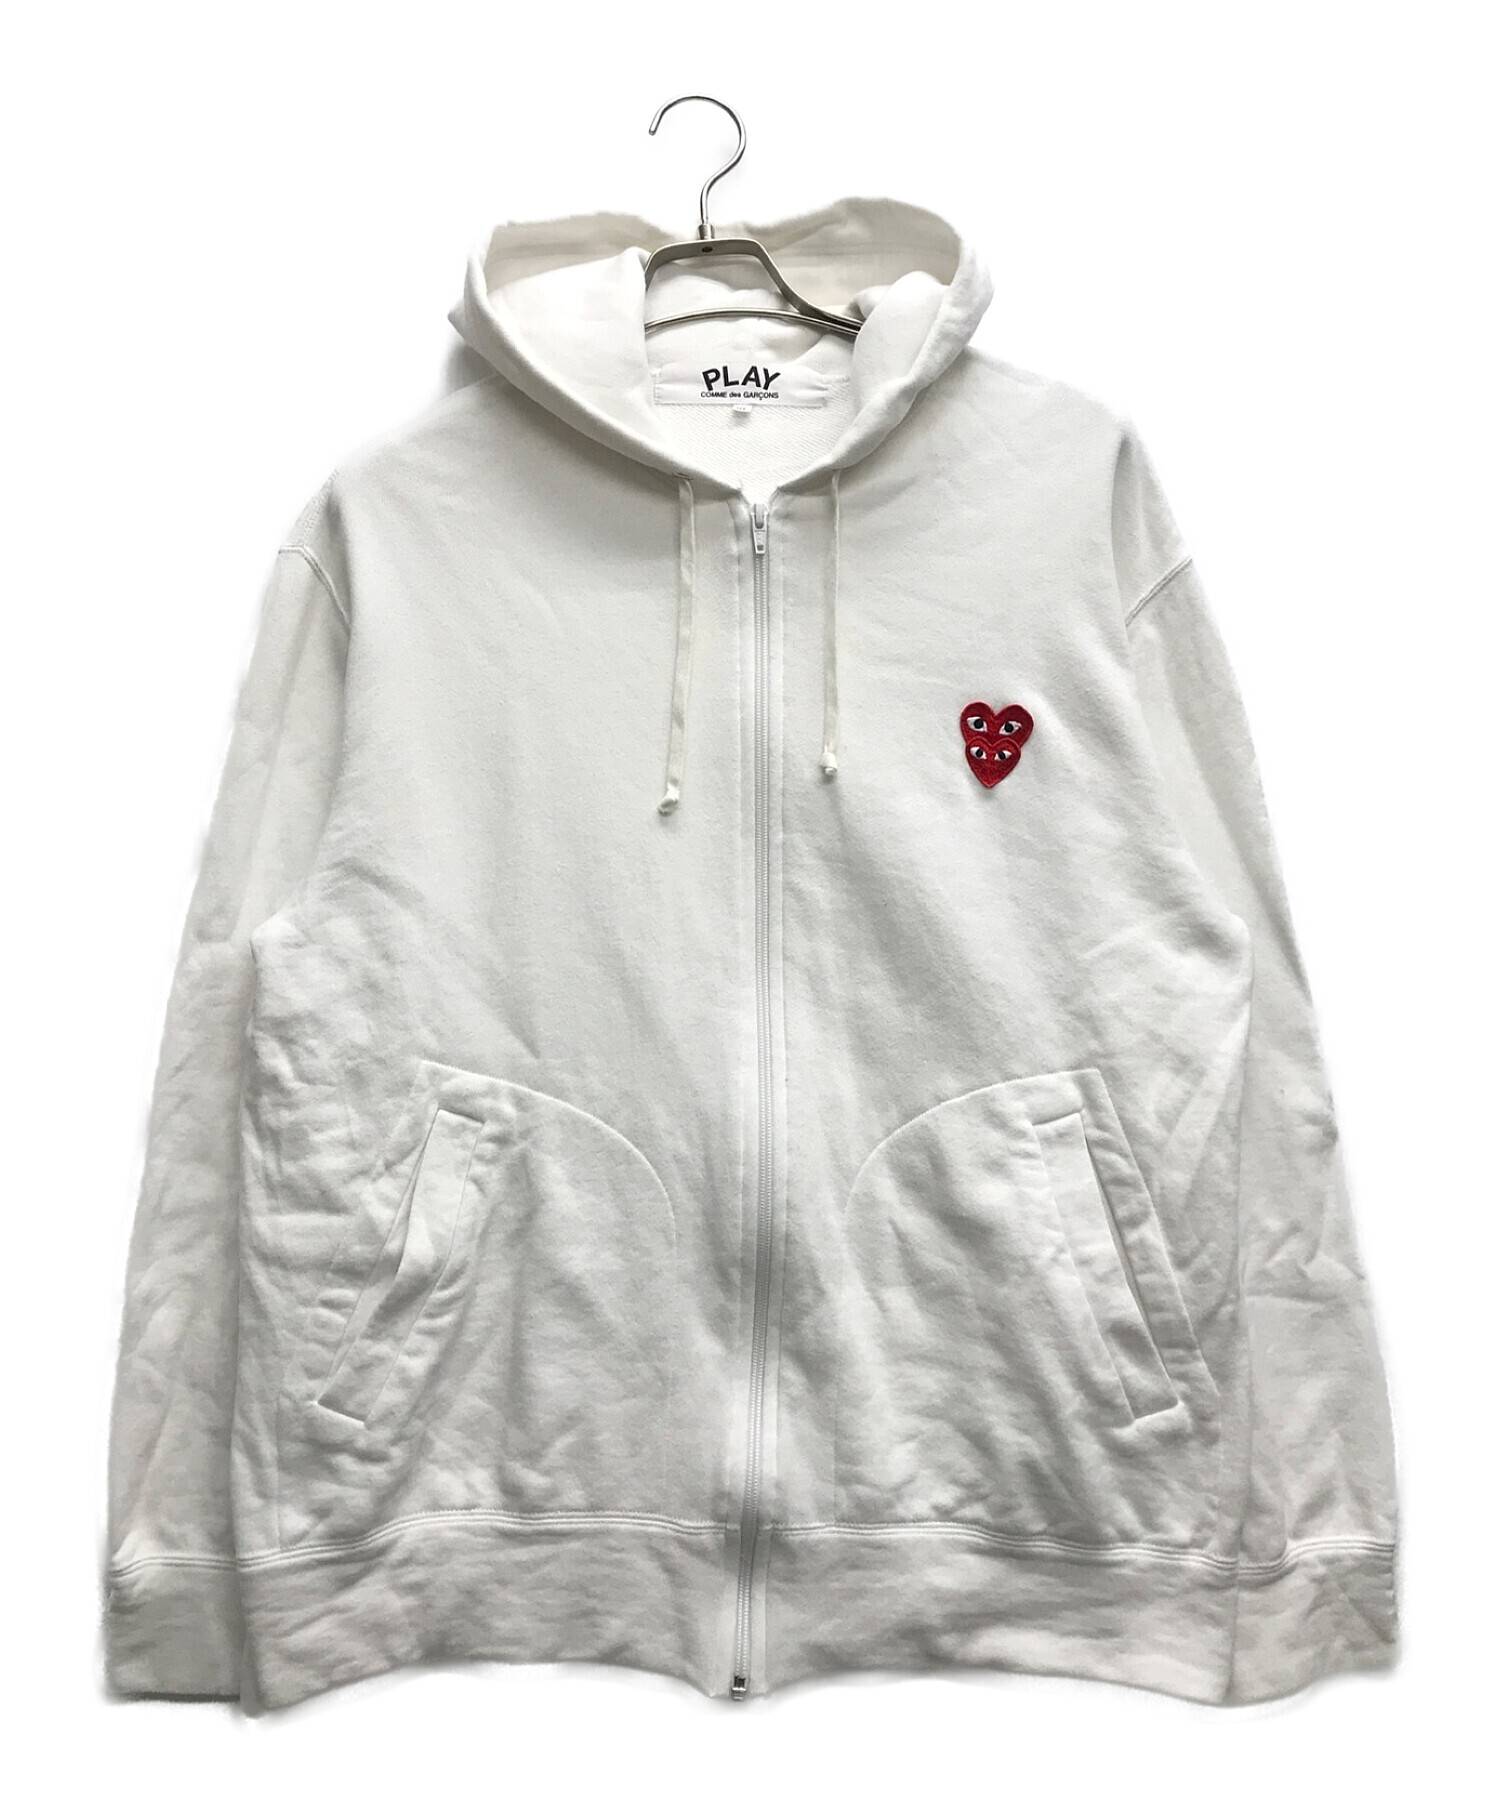 PLAY COMME des GARCONS (プレイ コムデギャルソン) PLAY Double Red Heart Hoodie/ ジップパーカー  ホワイト サイズ:XL